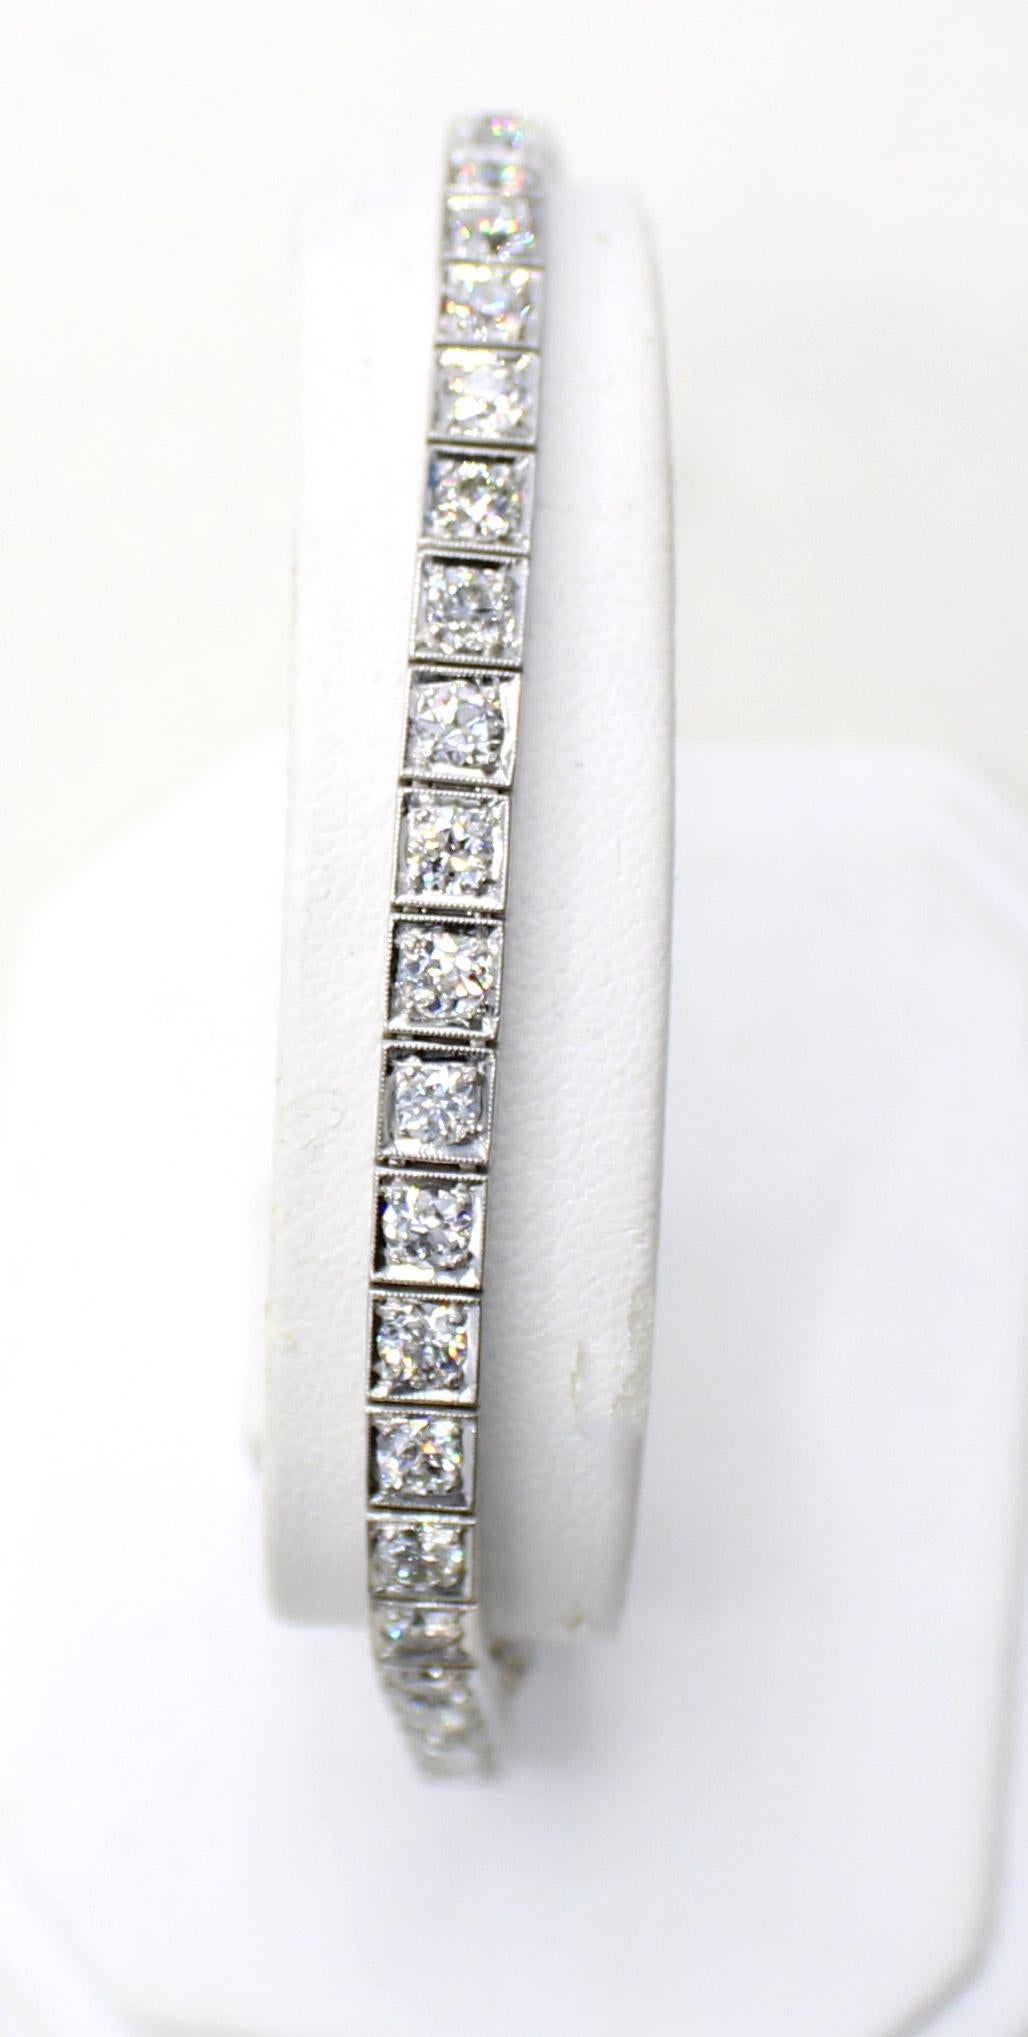 Masterfully handcrafted with beautiful hand-engraving on the sides, this Art Deco platinum bracelet is set with 39 bright white Old European Cut diamonds with an approximate total weight of 5.10 carats. Length 7 inches 